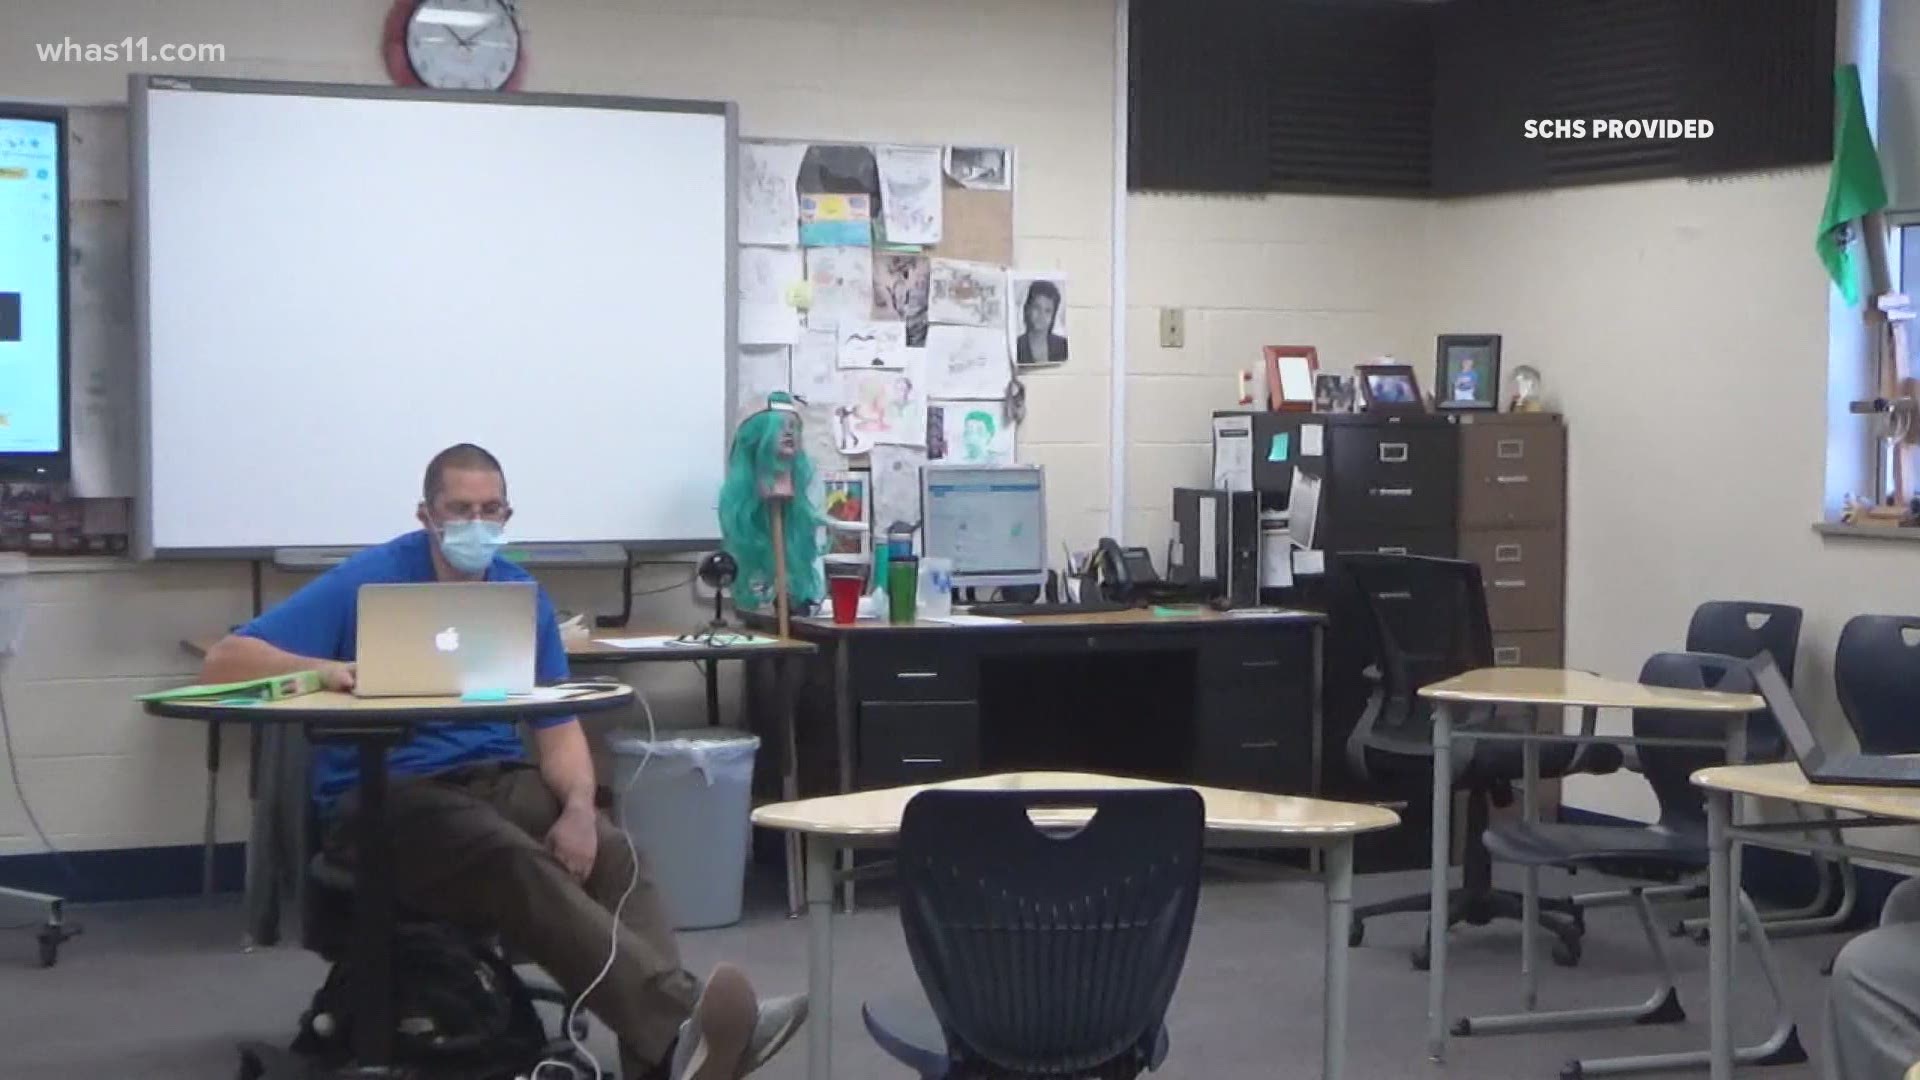 Mr. Jeff Bracken uses his own adversity to inspire his students at Shelby County High School.